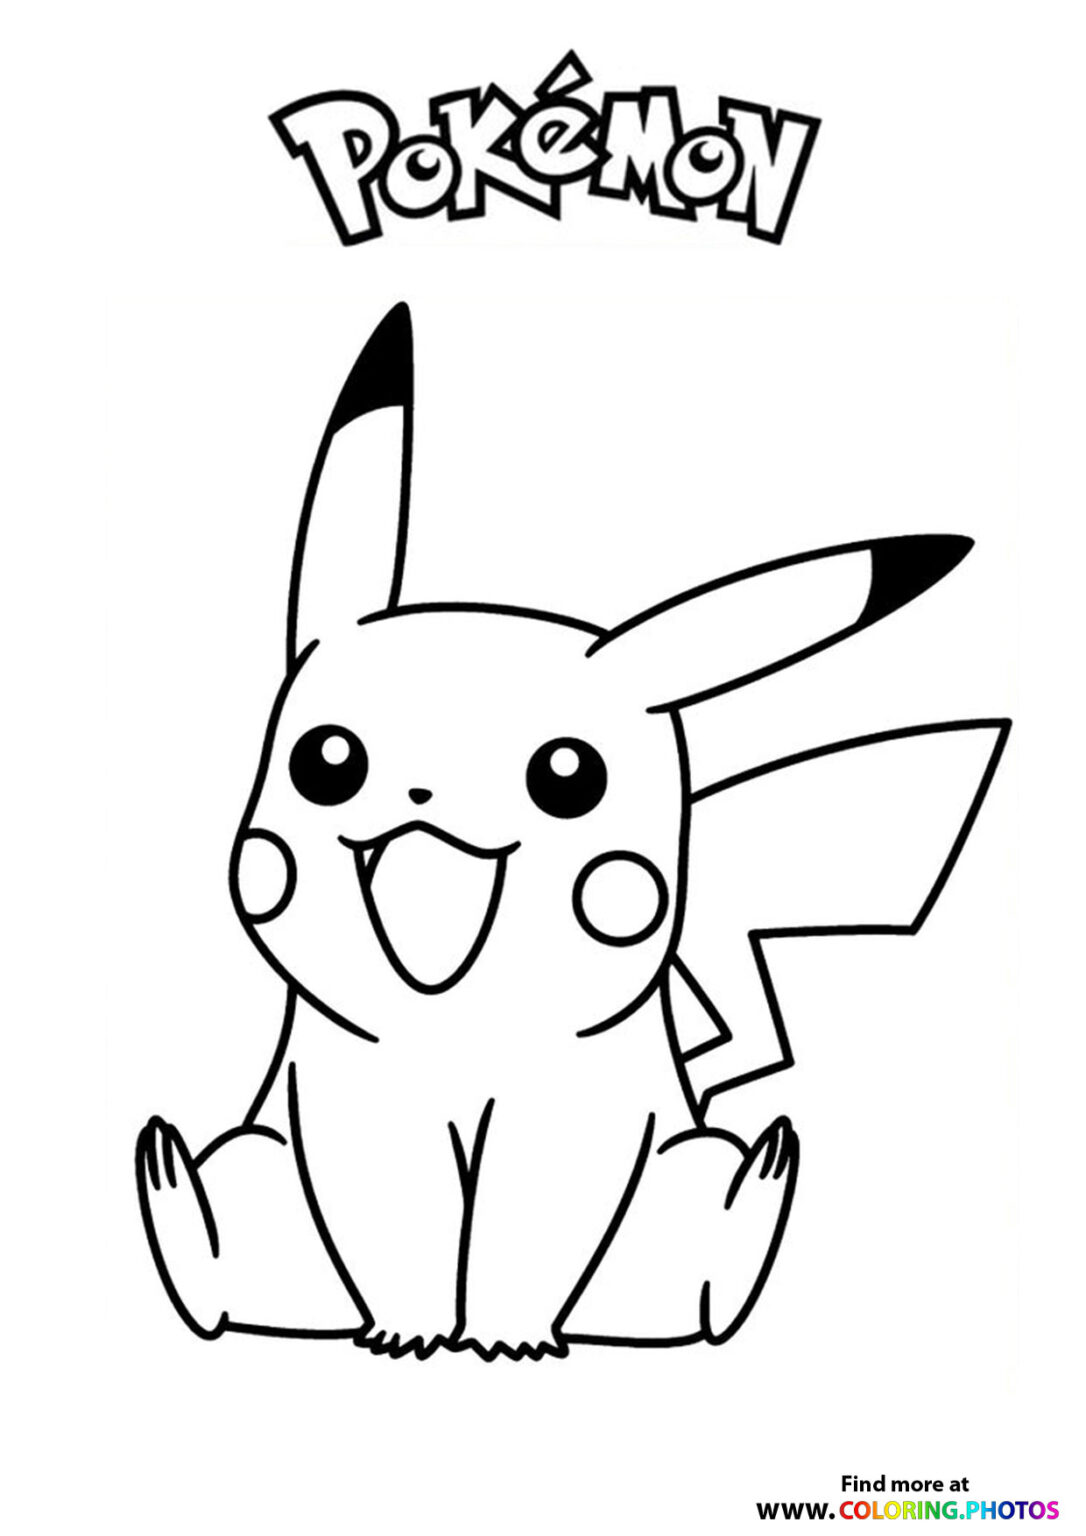 Pikachu looking cute - Pokemon - Coloring Pages for kids